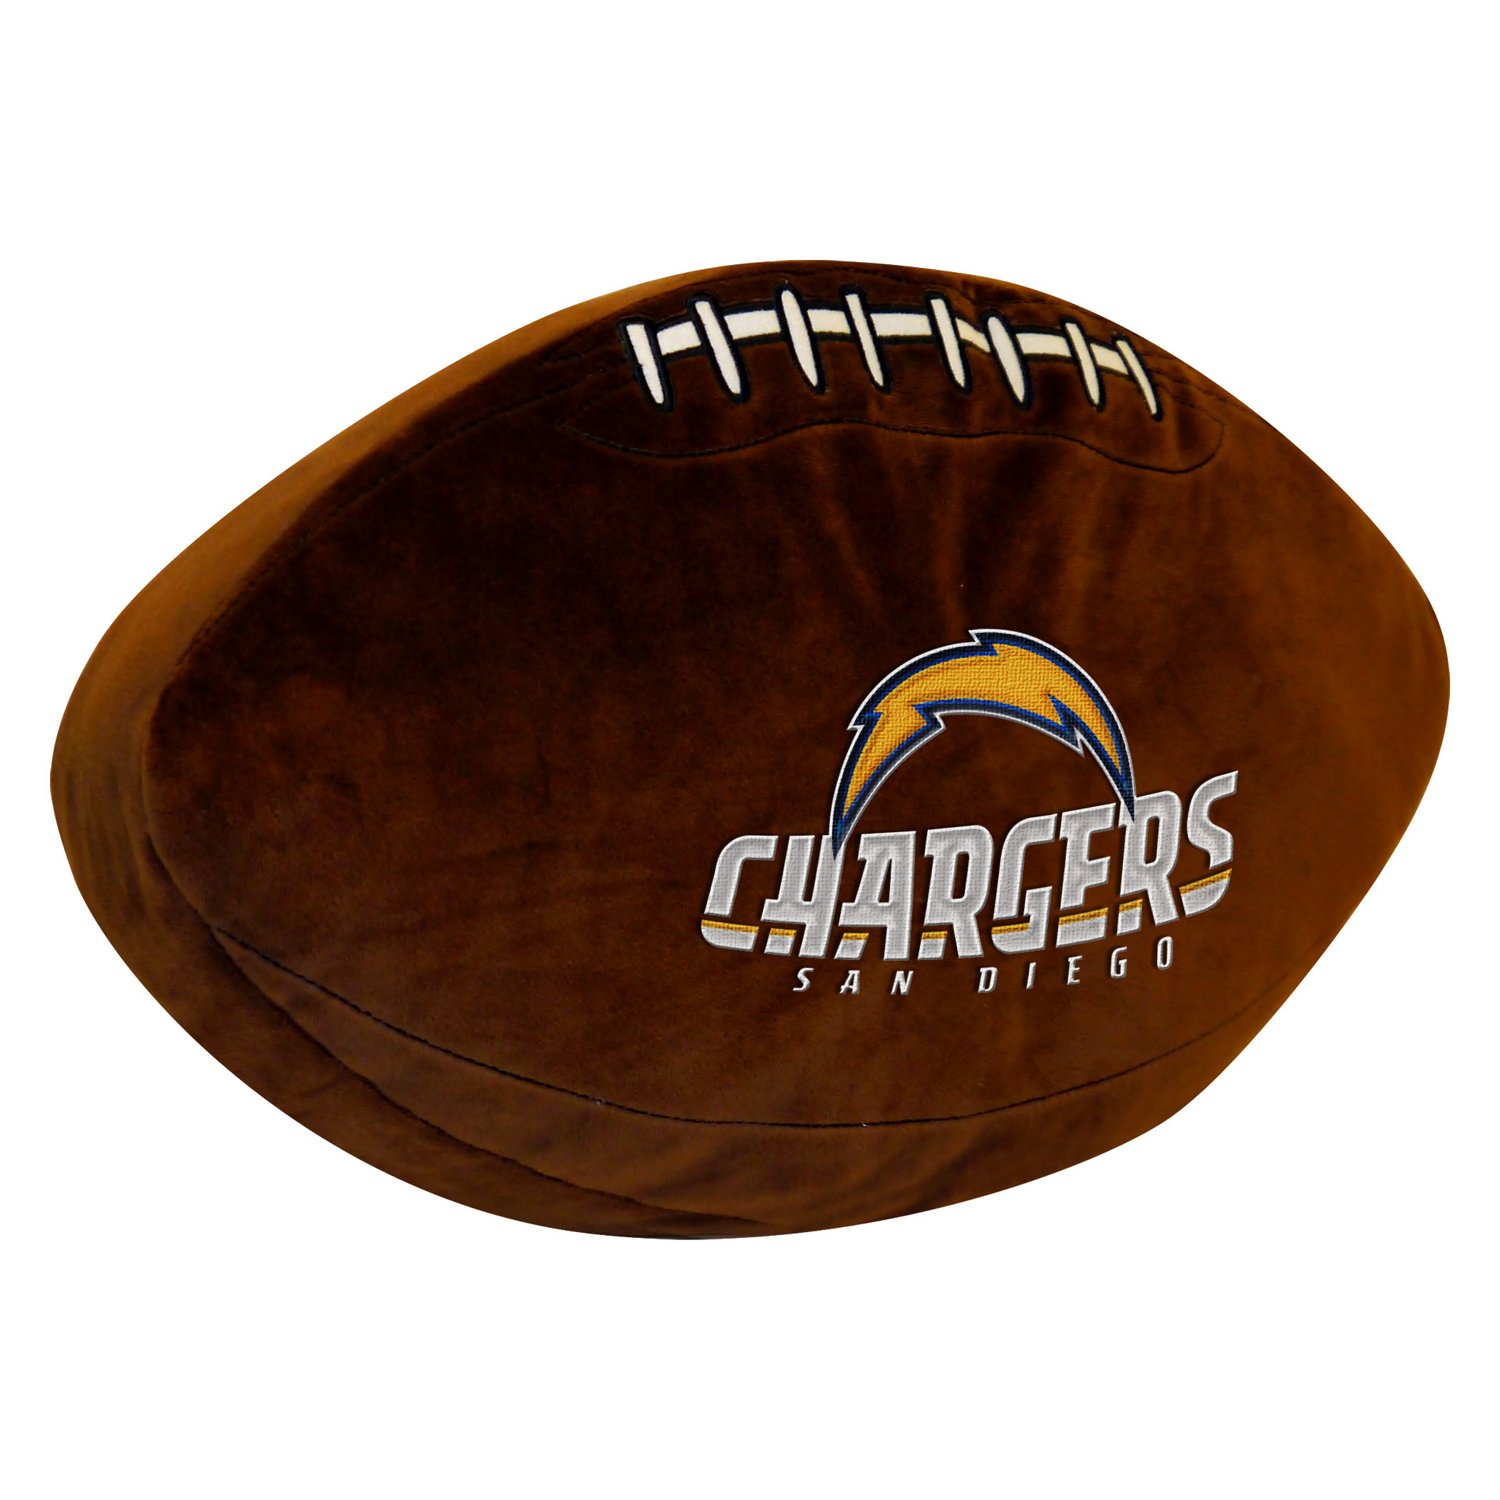 San Diego Chargers - San Diego Chargers Shirts - Academy - 웹